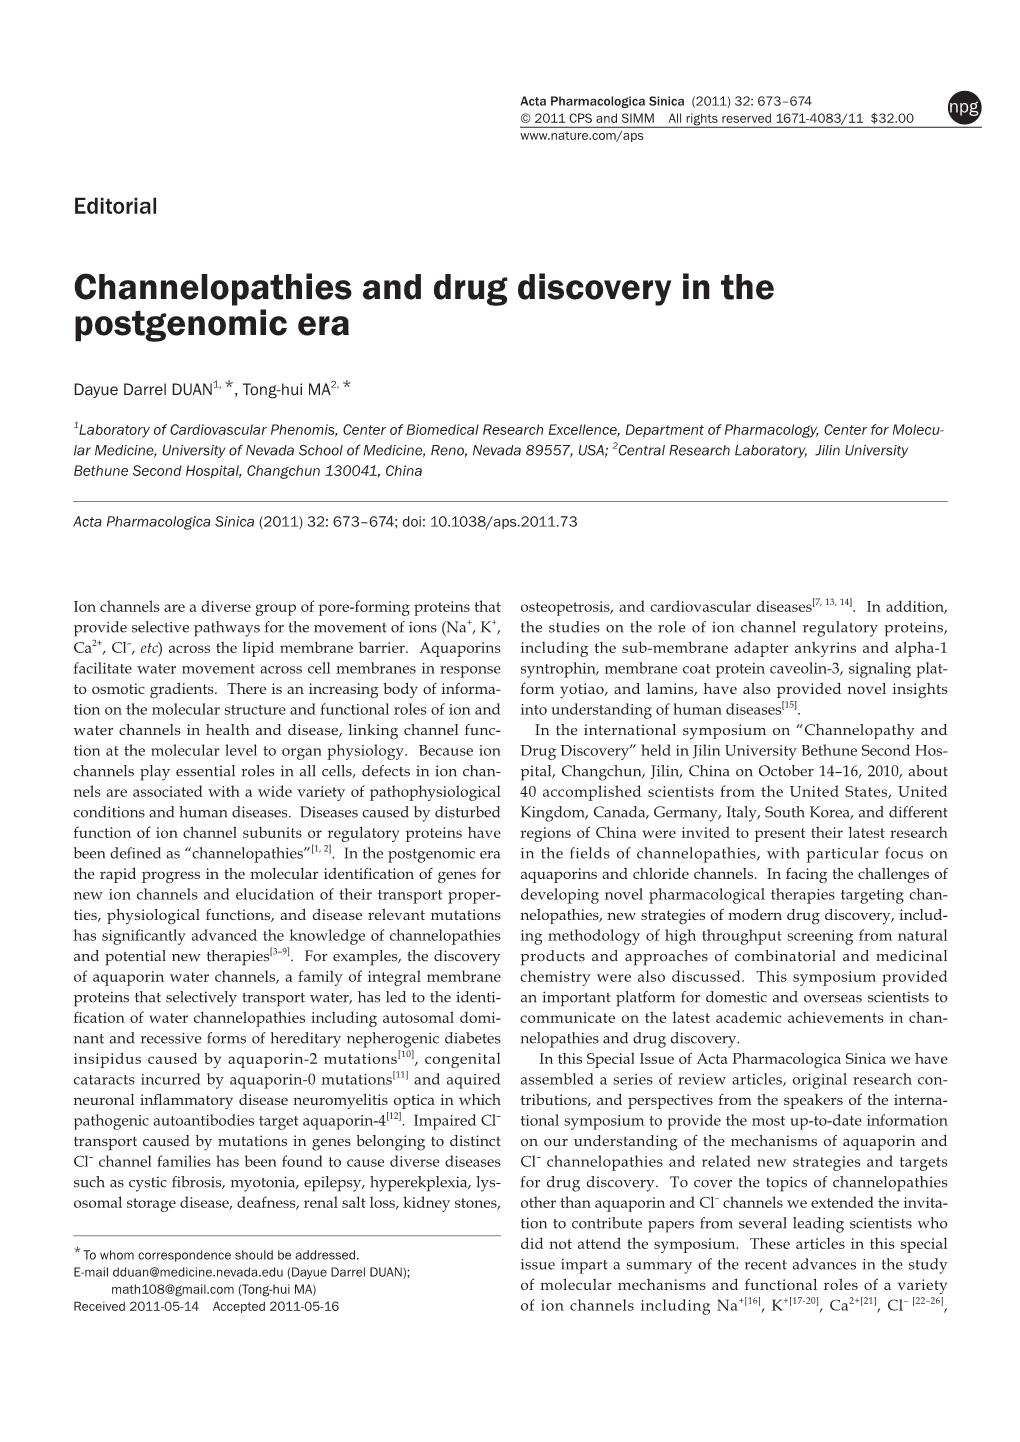 Channelopathies and Drug Discovery in the Postgenomic Era